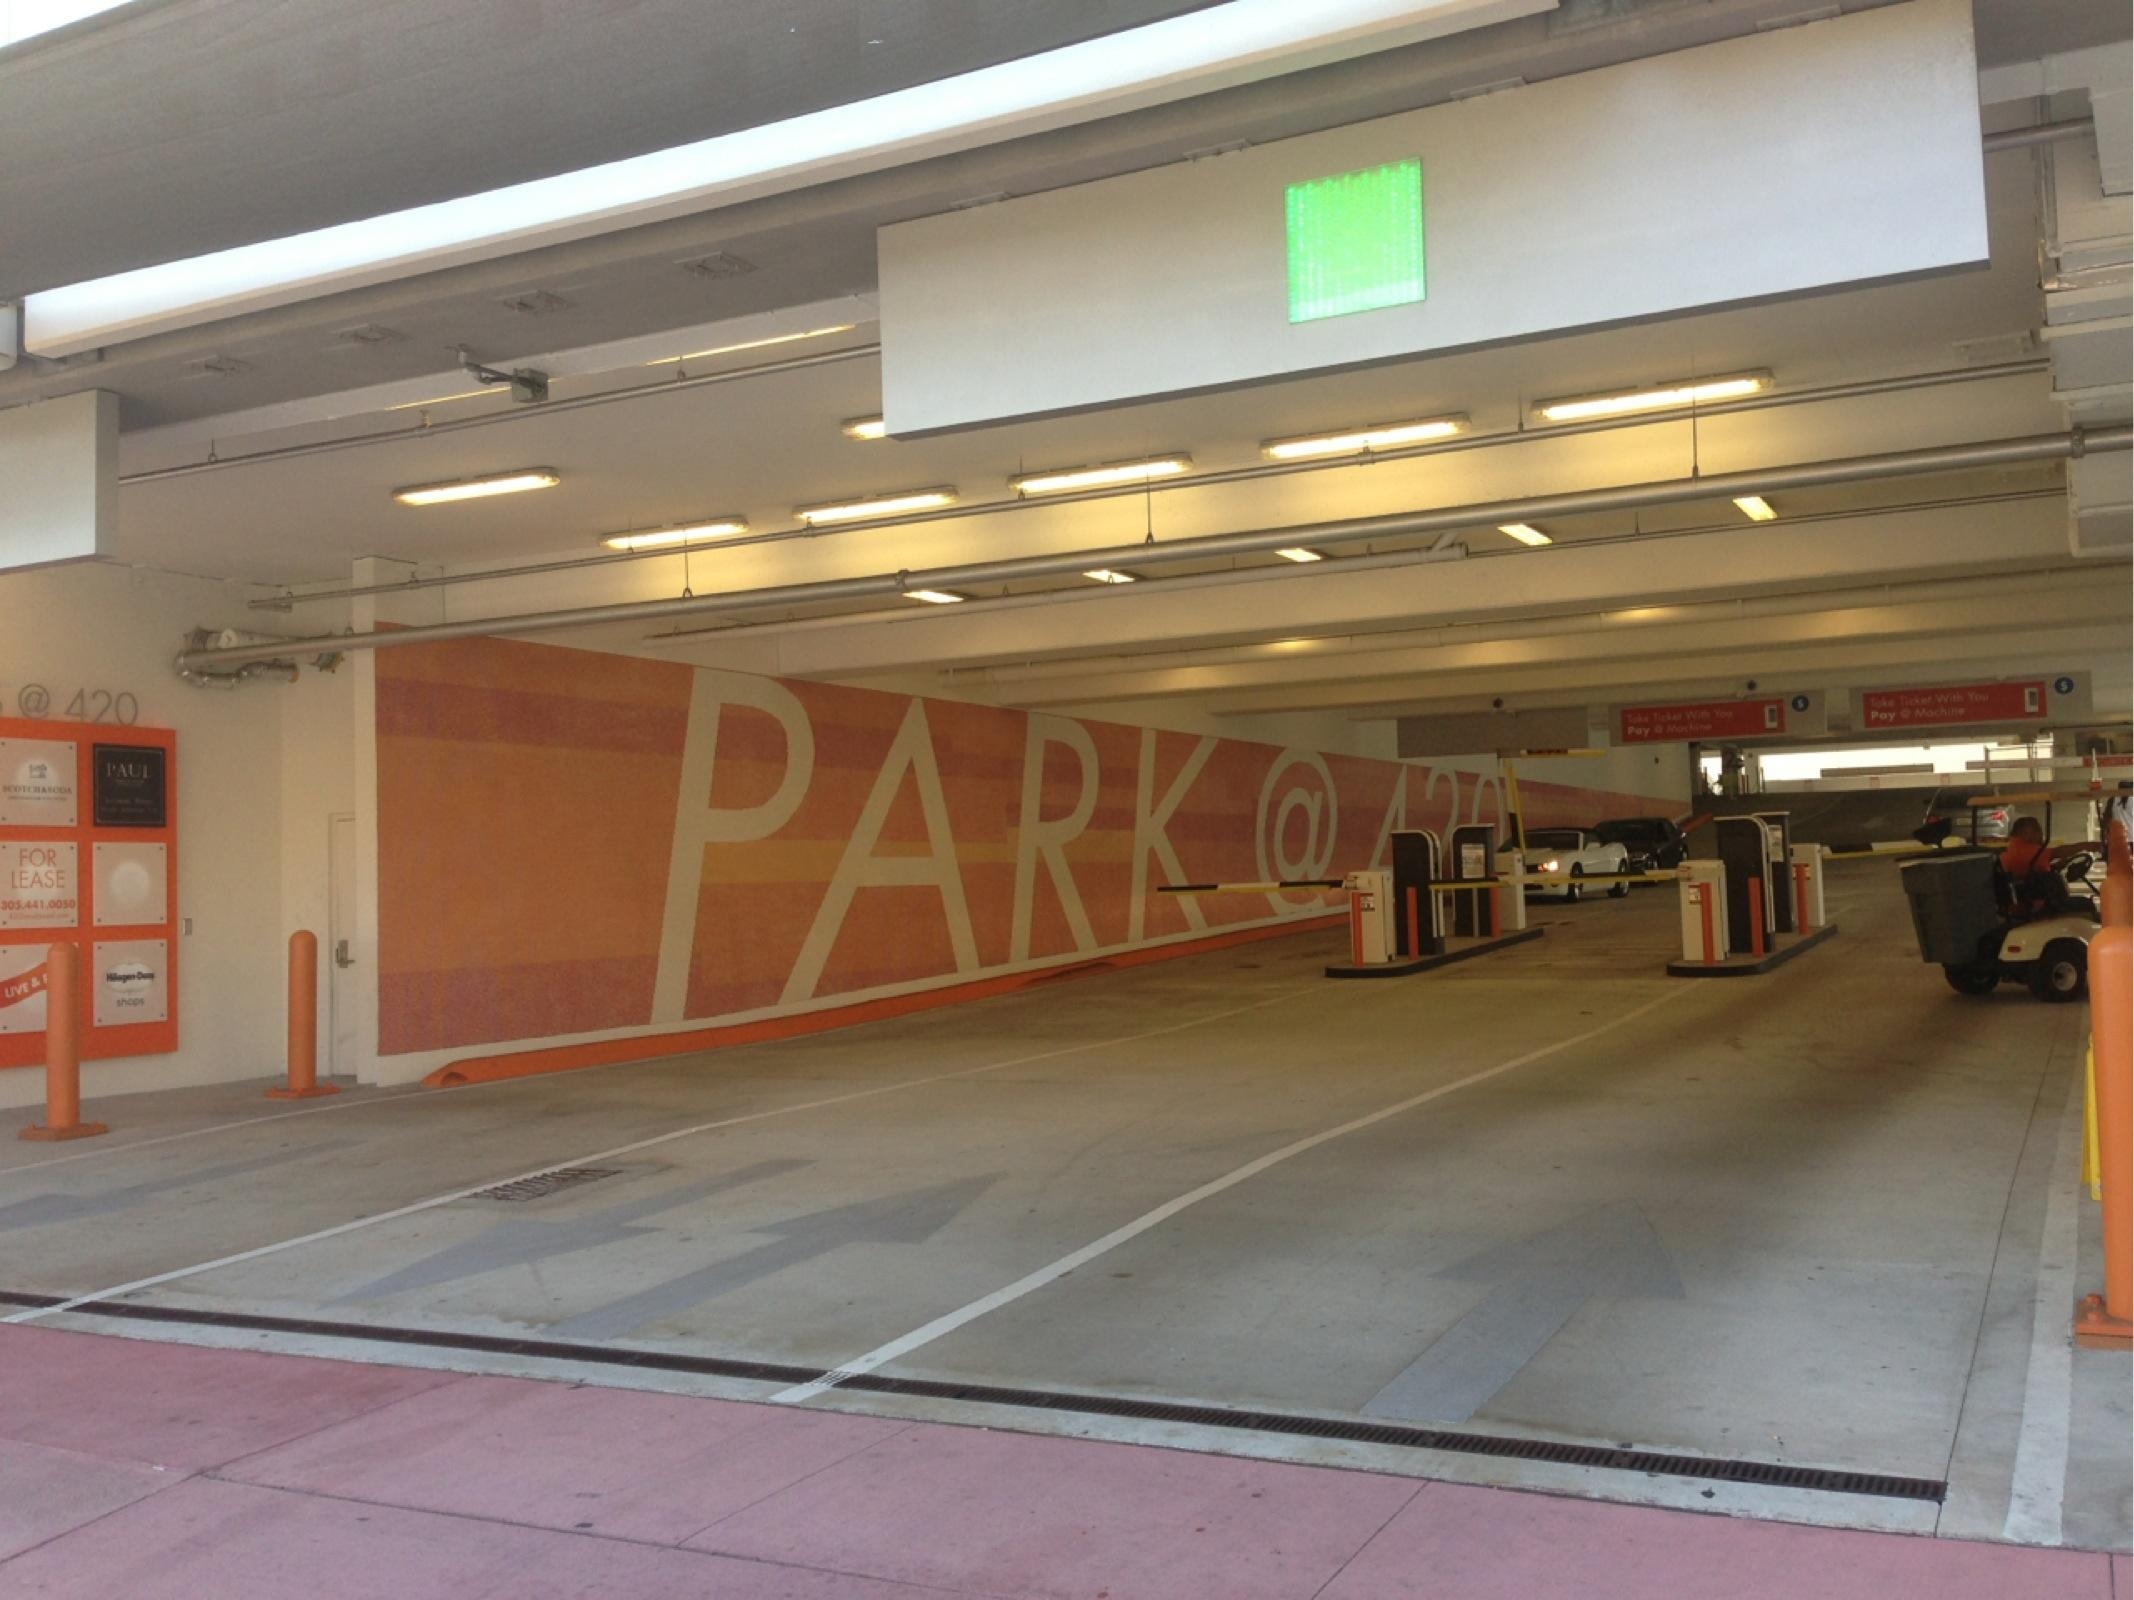 Park, Parking garage at 420 Lincoln Road, 420 Lincoln Road